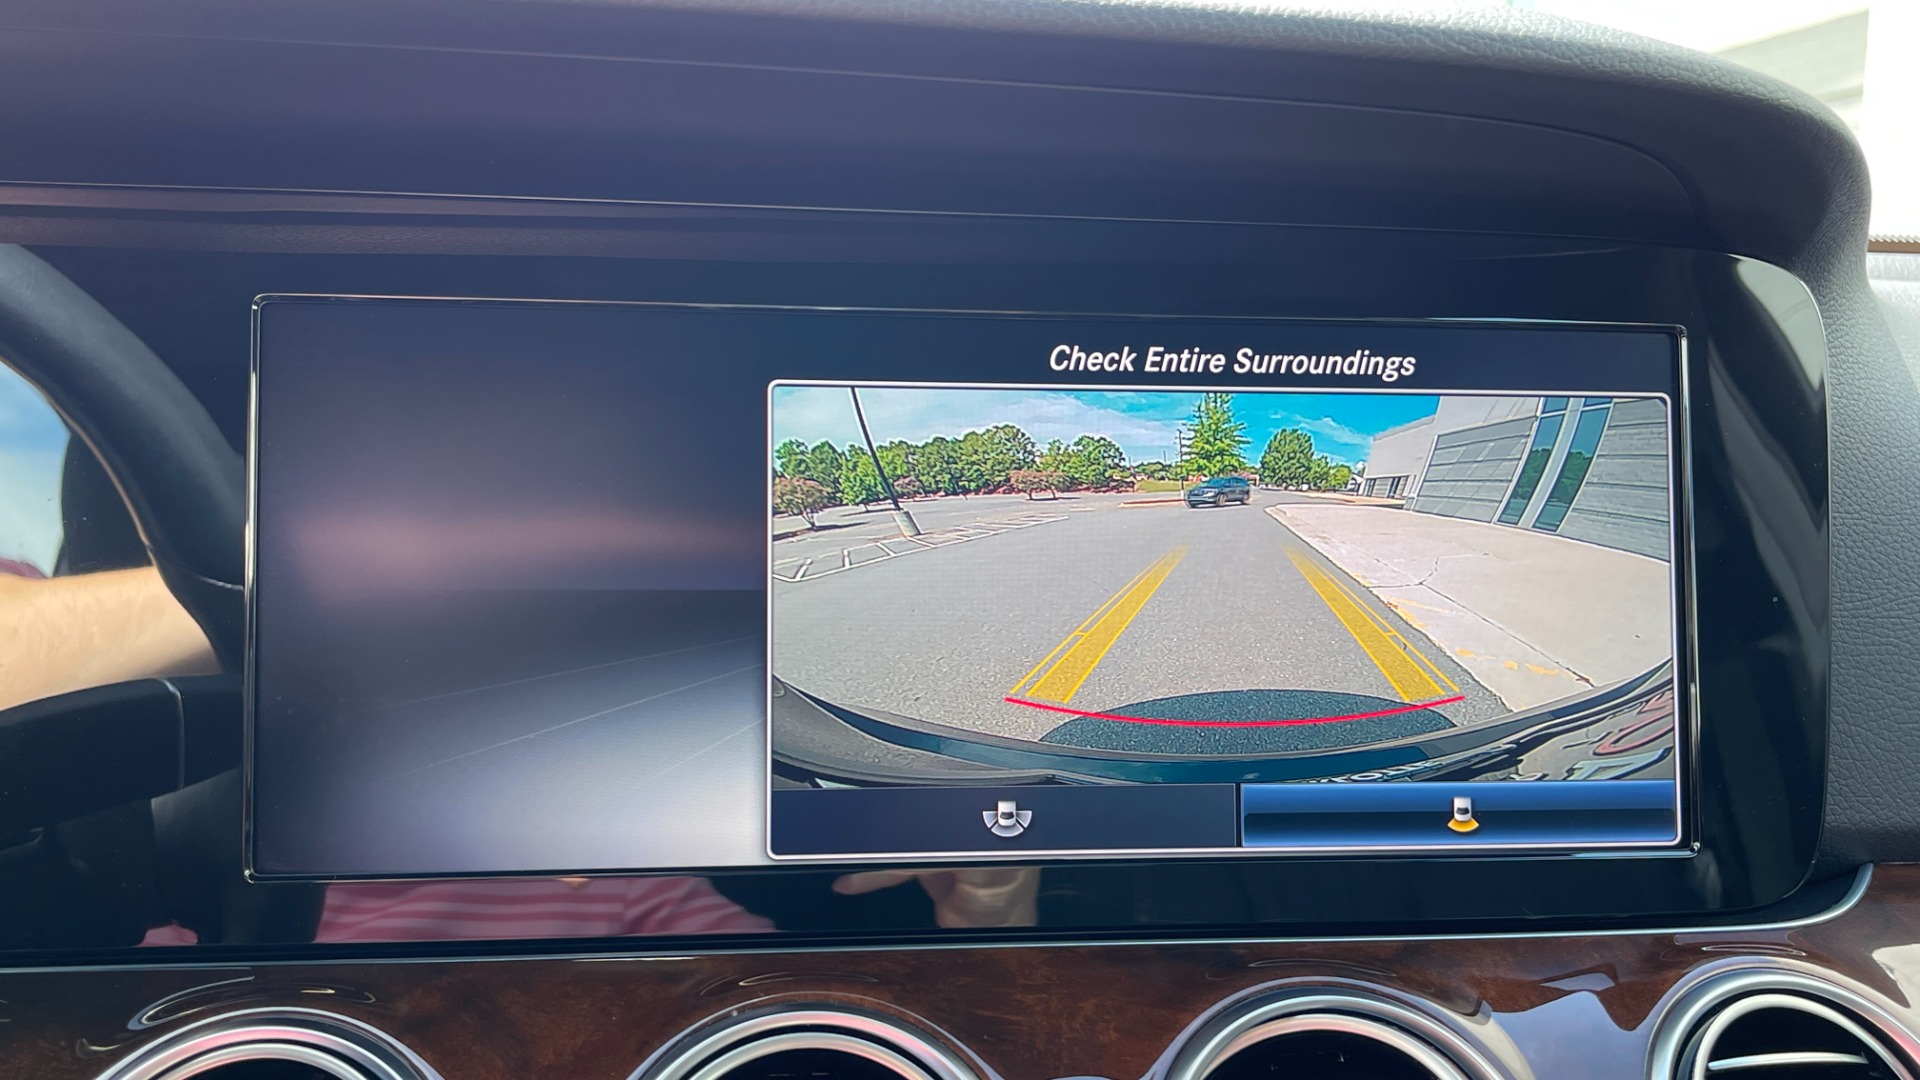 Used 2019 Mercedes-Benz E-Class E300 / 4MATIC / BURMESTER SOUND / PREMIUM PACKAGE / BLIND SPOT ASSIST for sale $39,395 at Formula Imports in Charlotte NC 28227 27